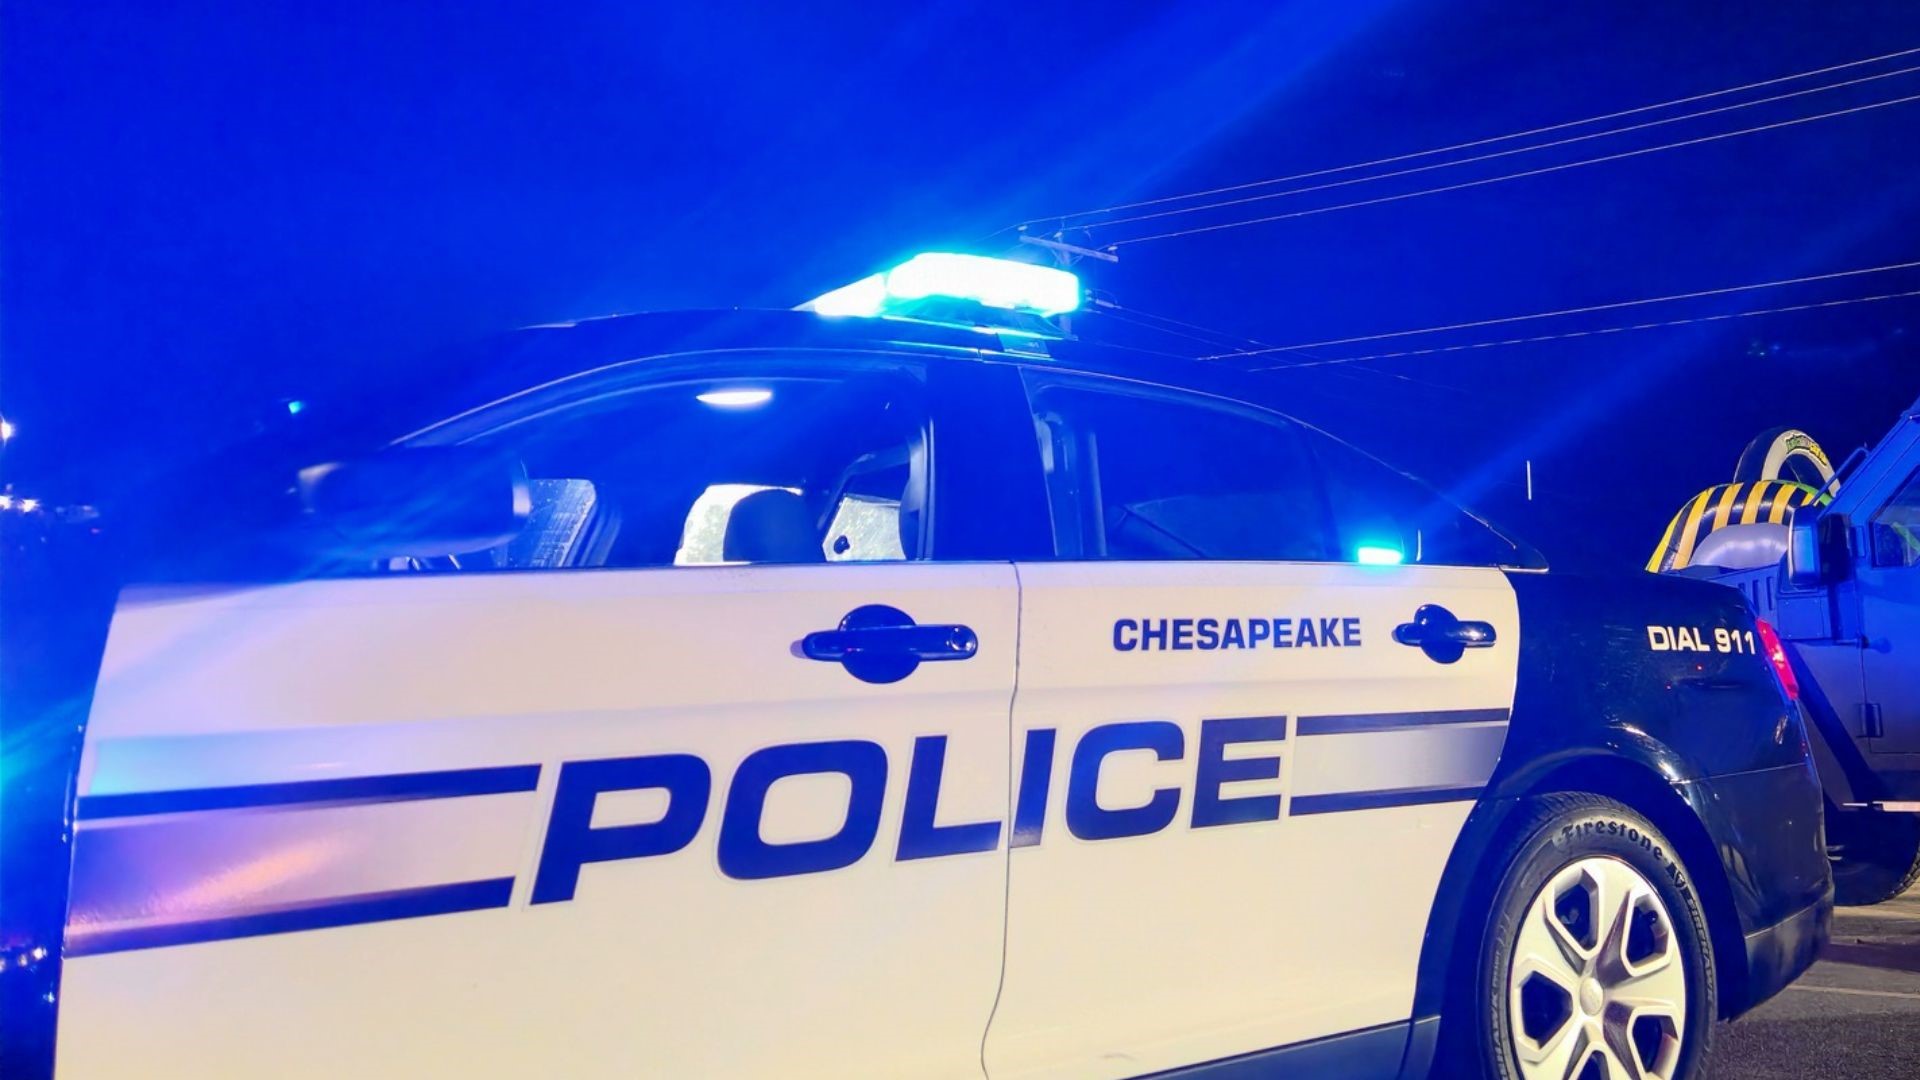 Chesapeake police say they responded to the 4600 block of Backwoods Road off of Ballahack Road Wednesday around 7:20 p.m. for a report of a single-vehicle crash.